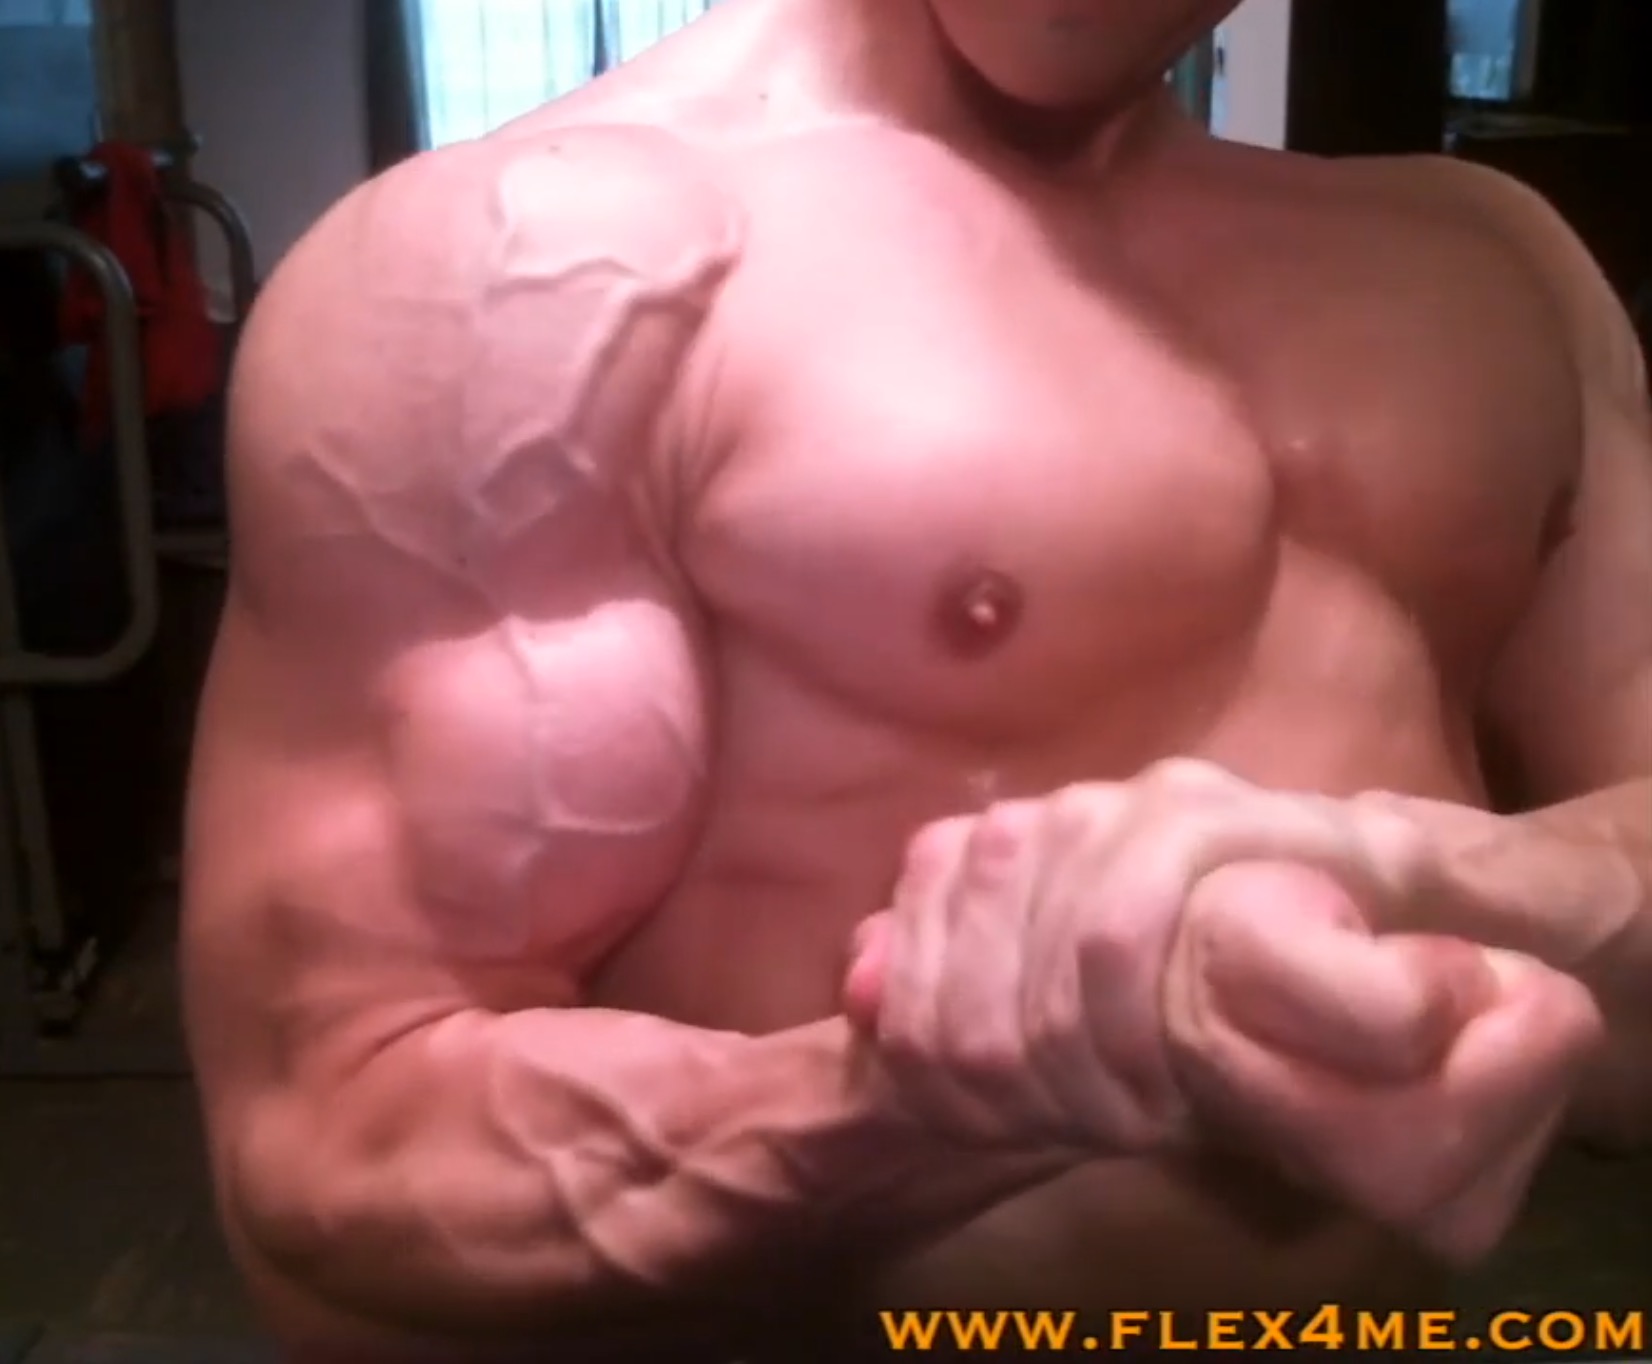 Mark is super ripped and vascular and he's having a great time fle...